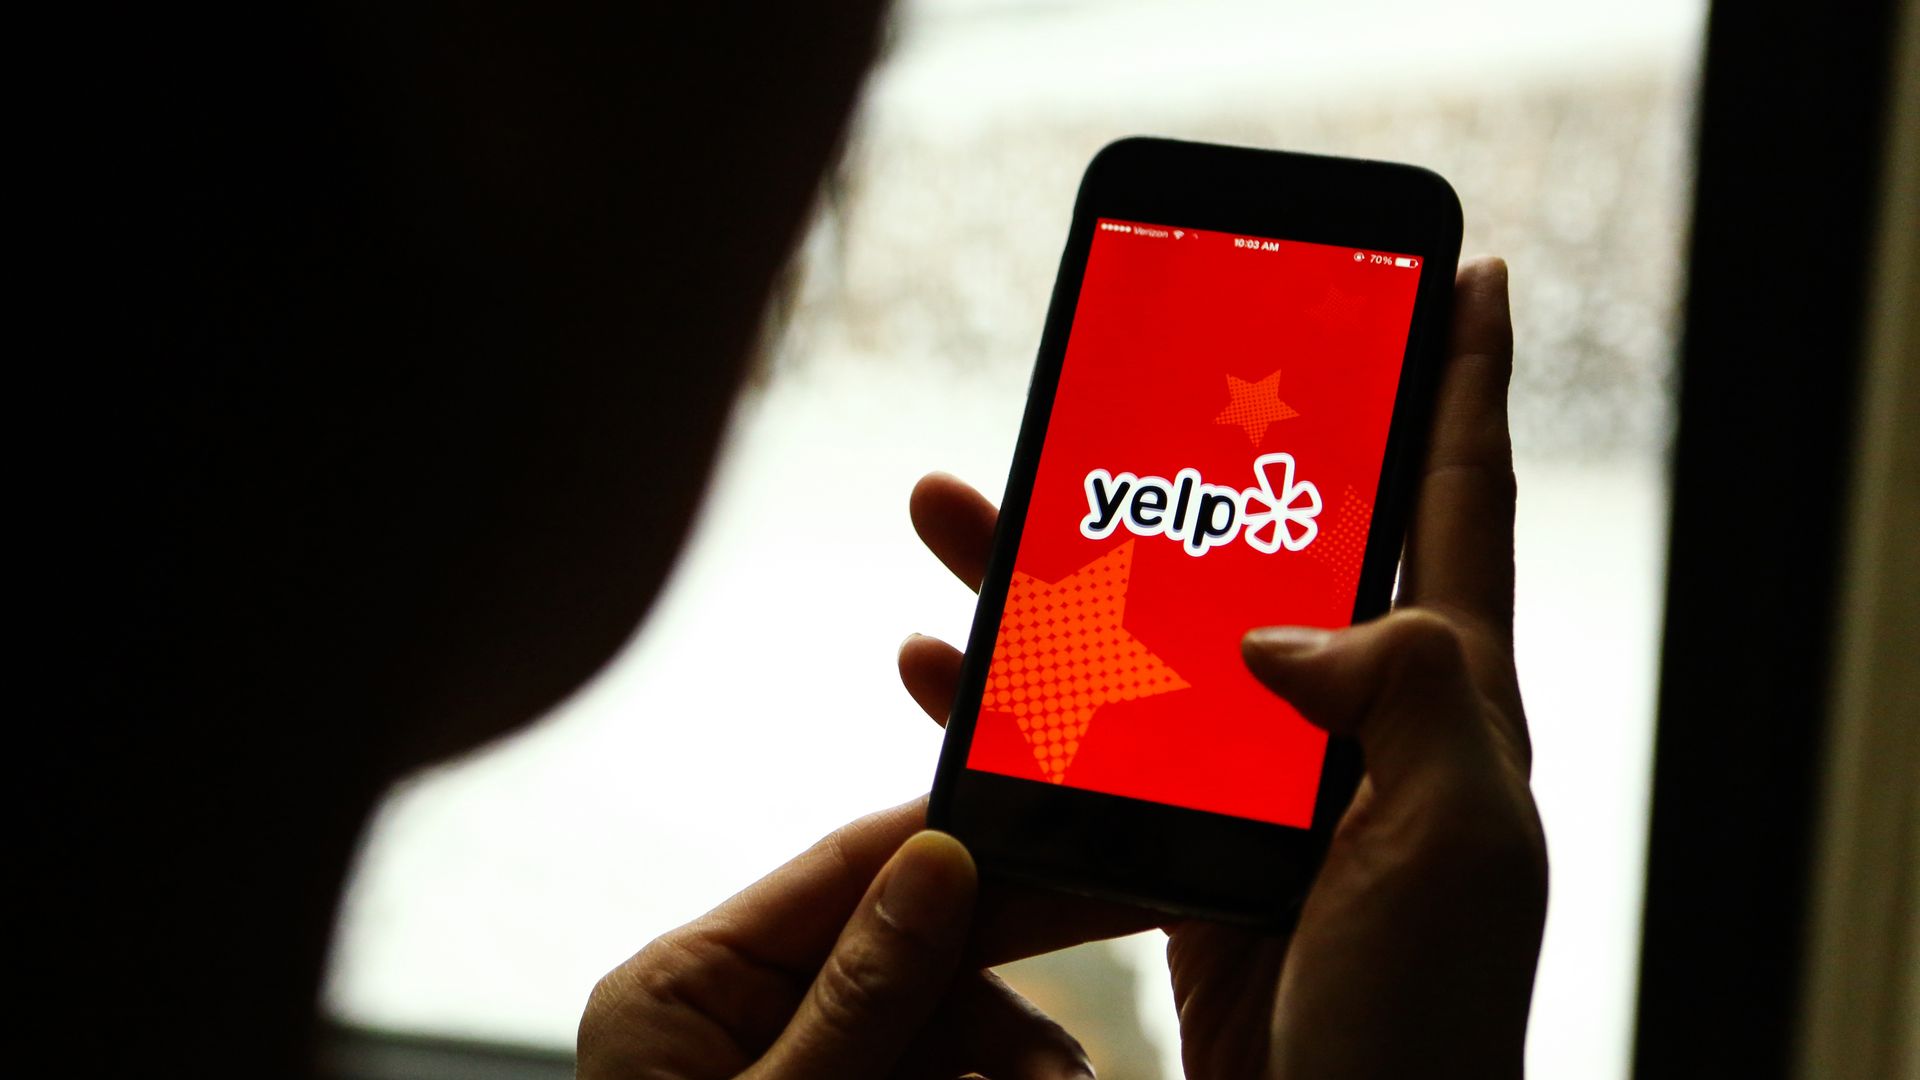 Picture of a person's hands holding a smartphone that has the Yelp logo on the screen